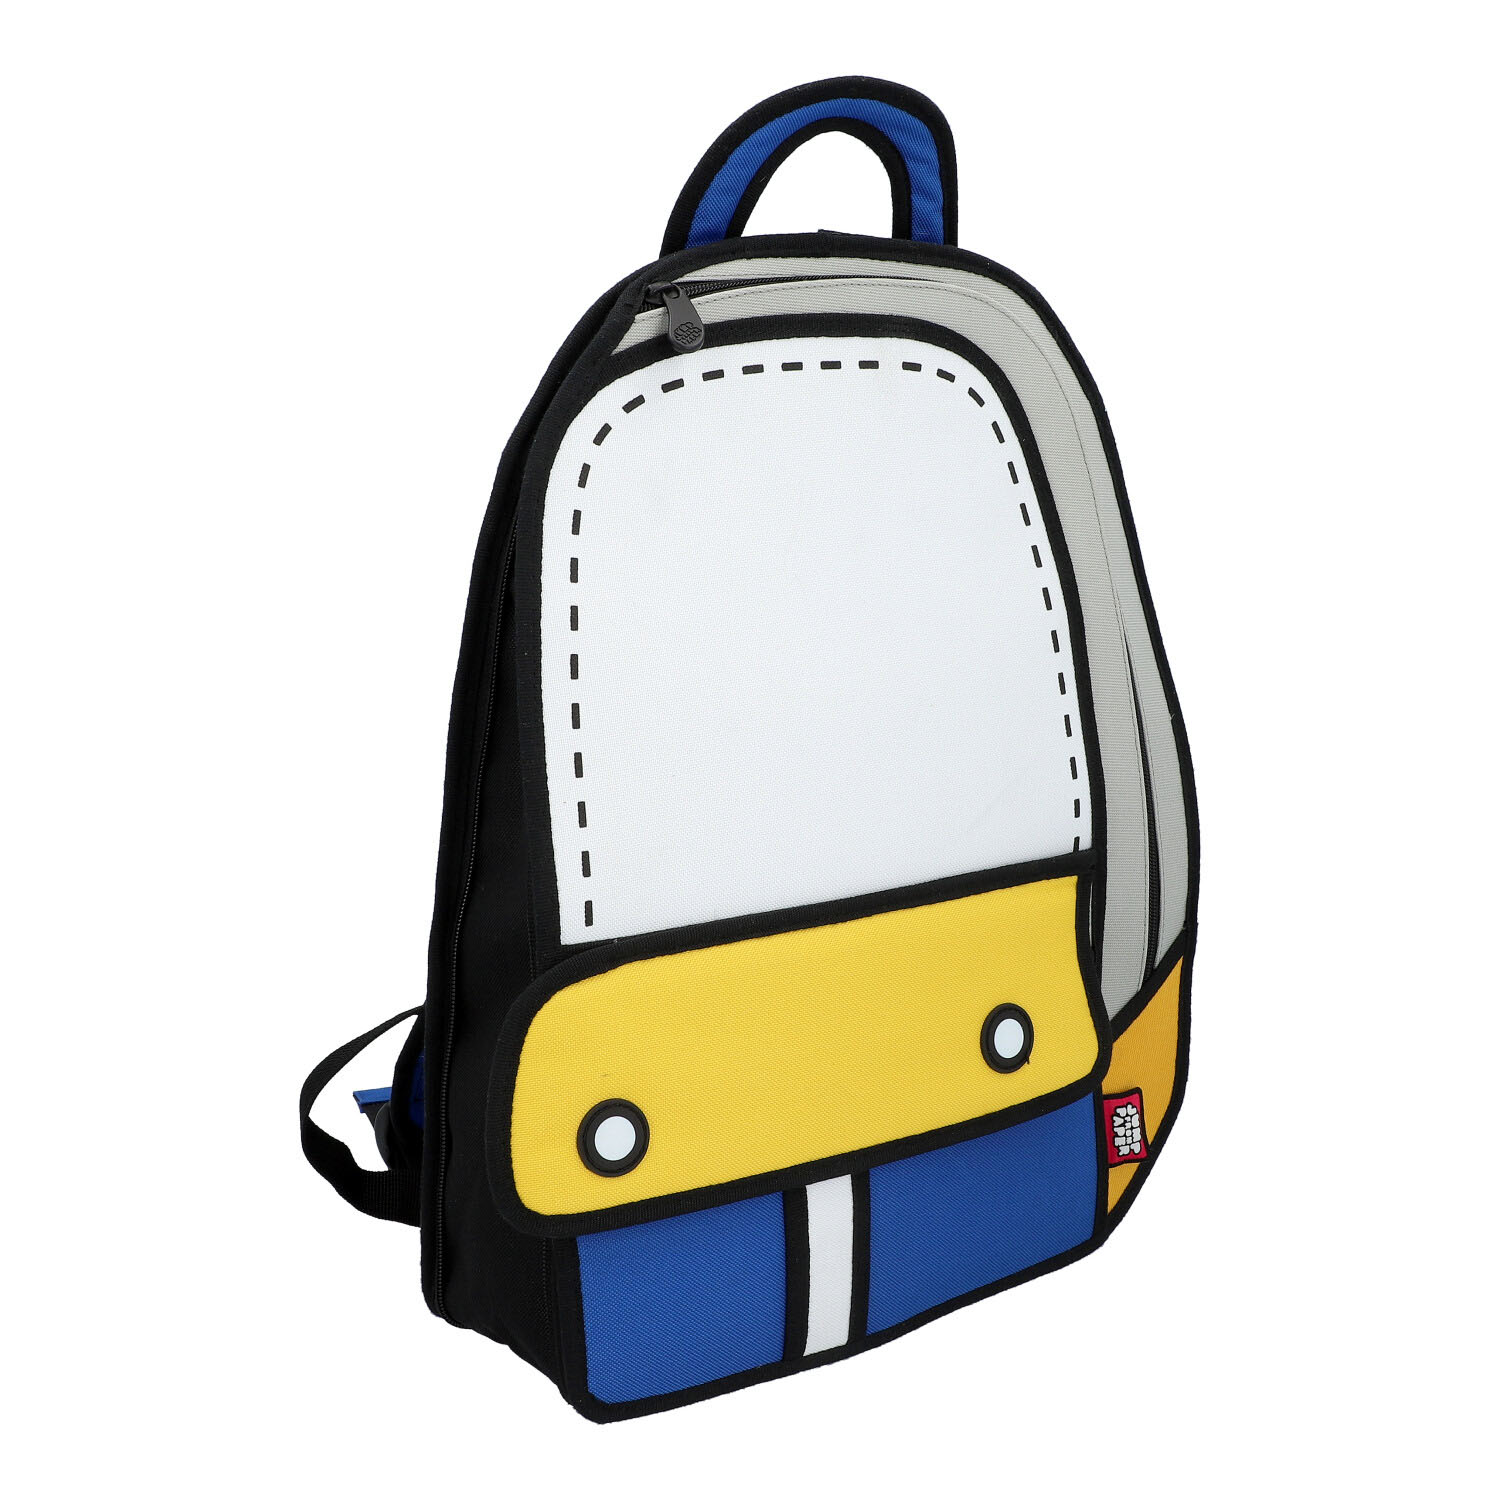 JUMP FROM PAPER Rucksack "ADVENTURE BACKPACK". - Image 2 of 8